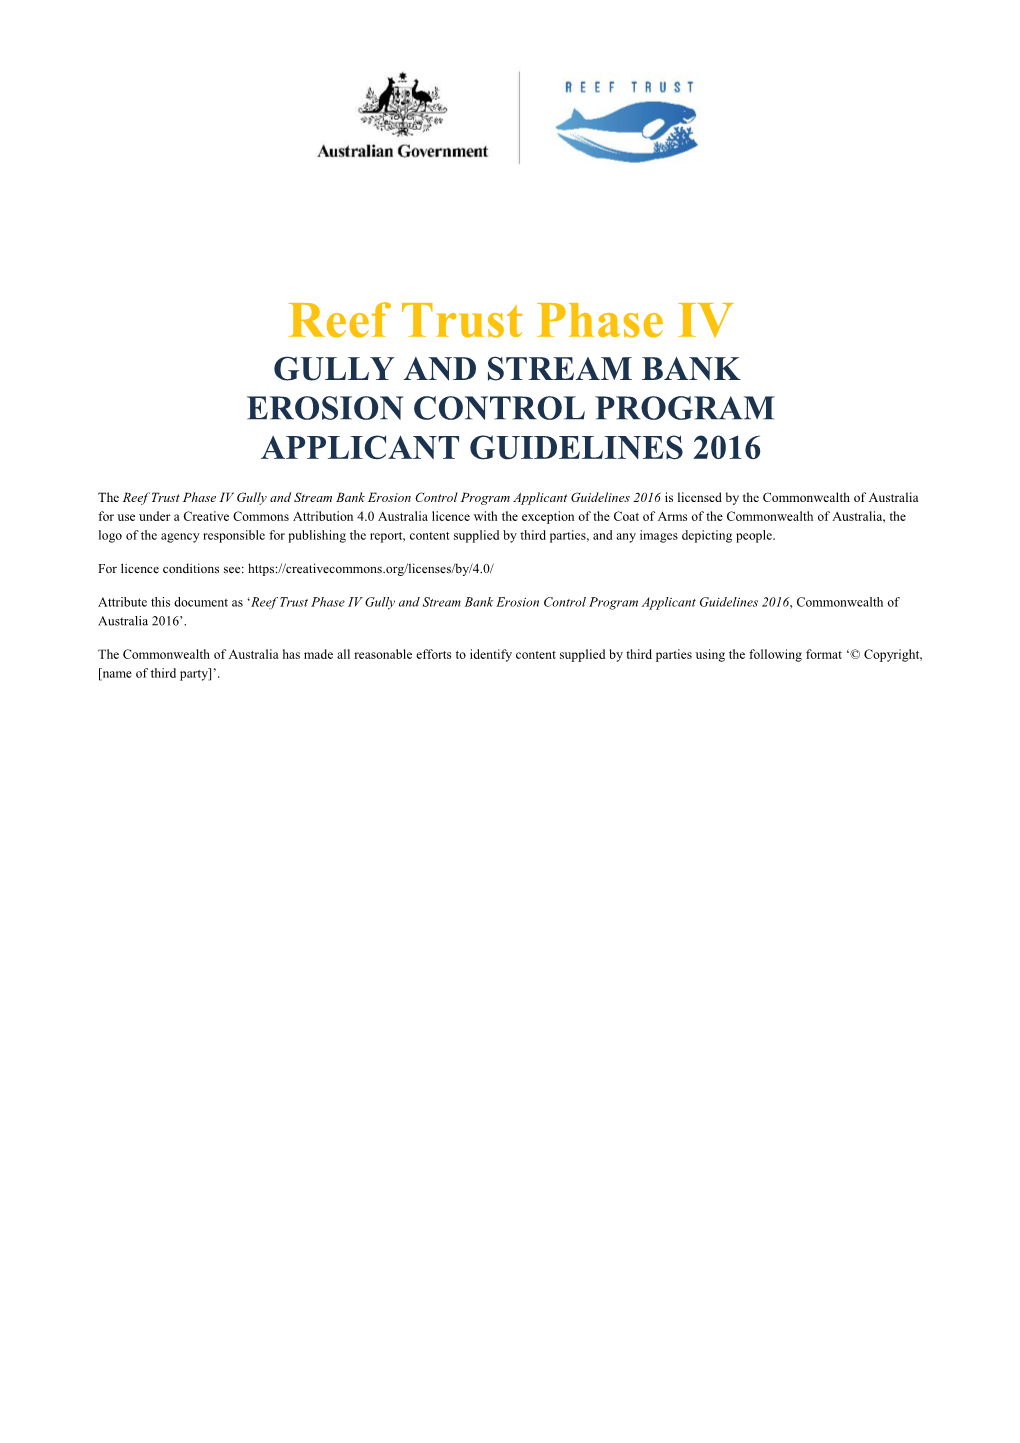 Reef Trust Phase IV: Gully and Stream Bank Erosion Control Program - Applicant Guidelines 2016